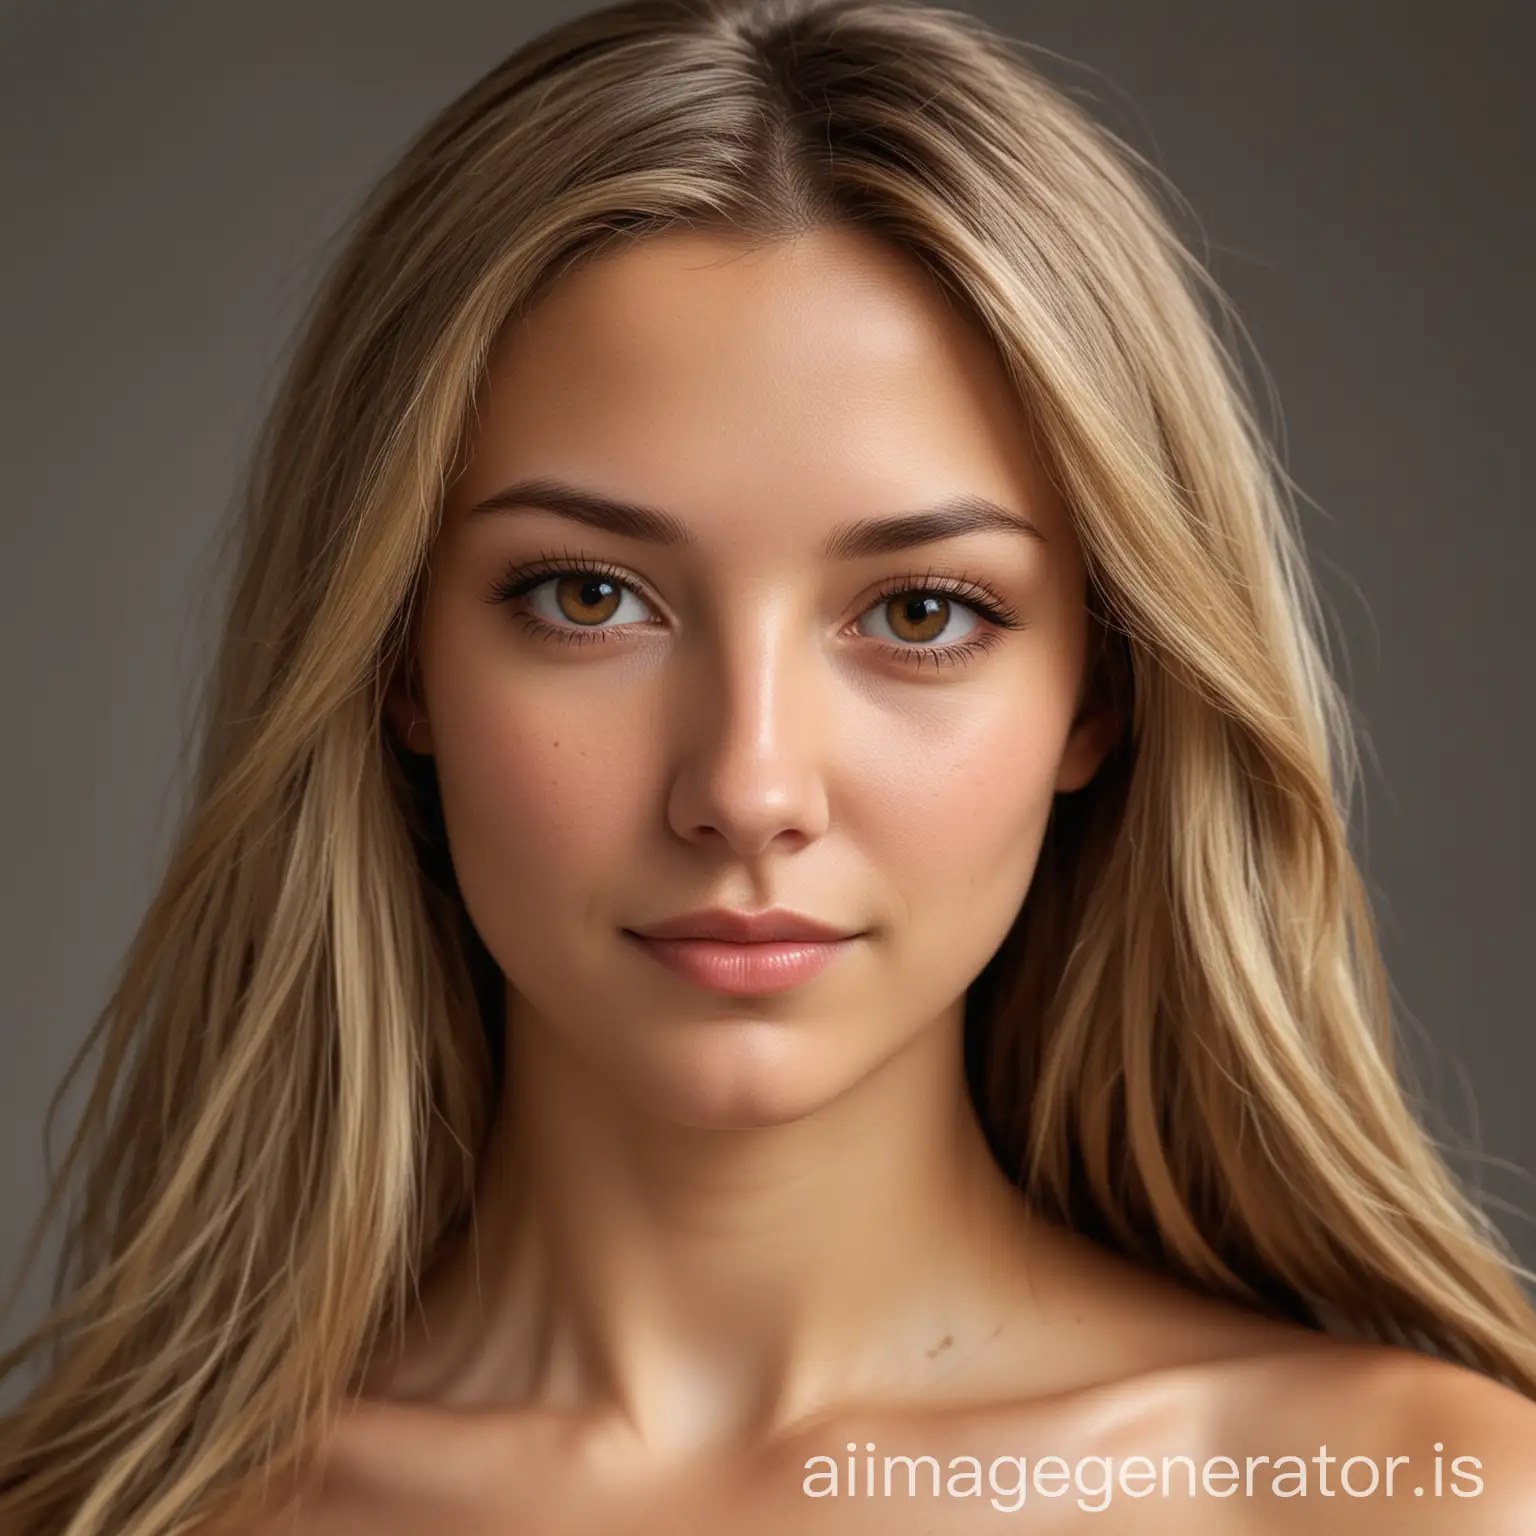 avatar of a girl, 34 years old, long brown blond hair, brown eyes, oval face. very attractive. bare shoulders.